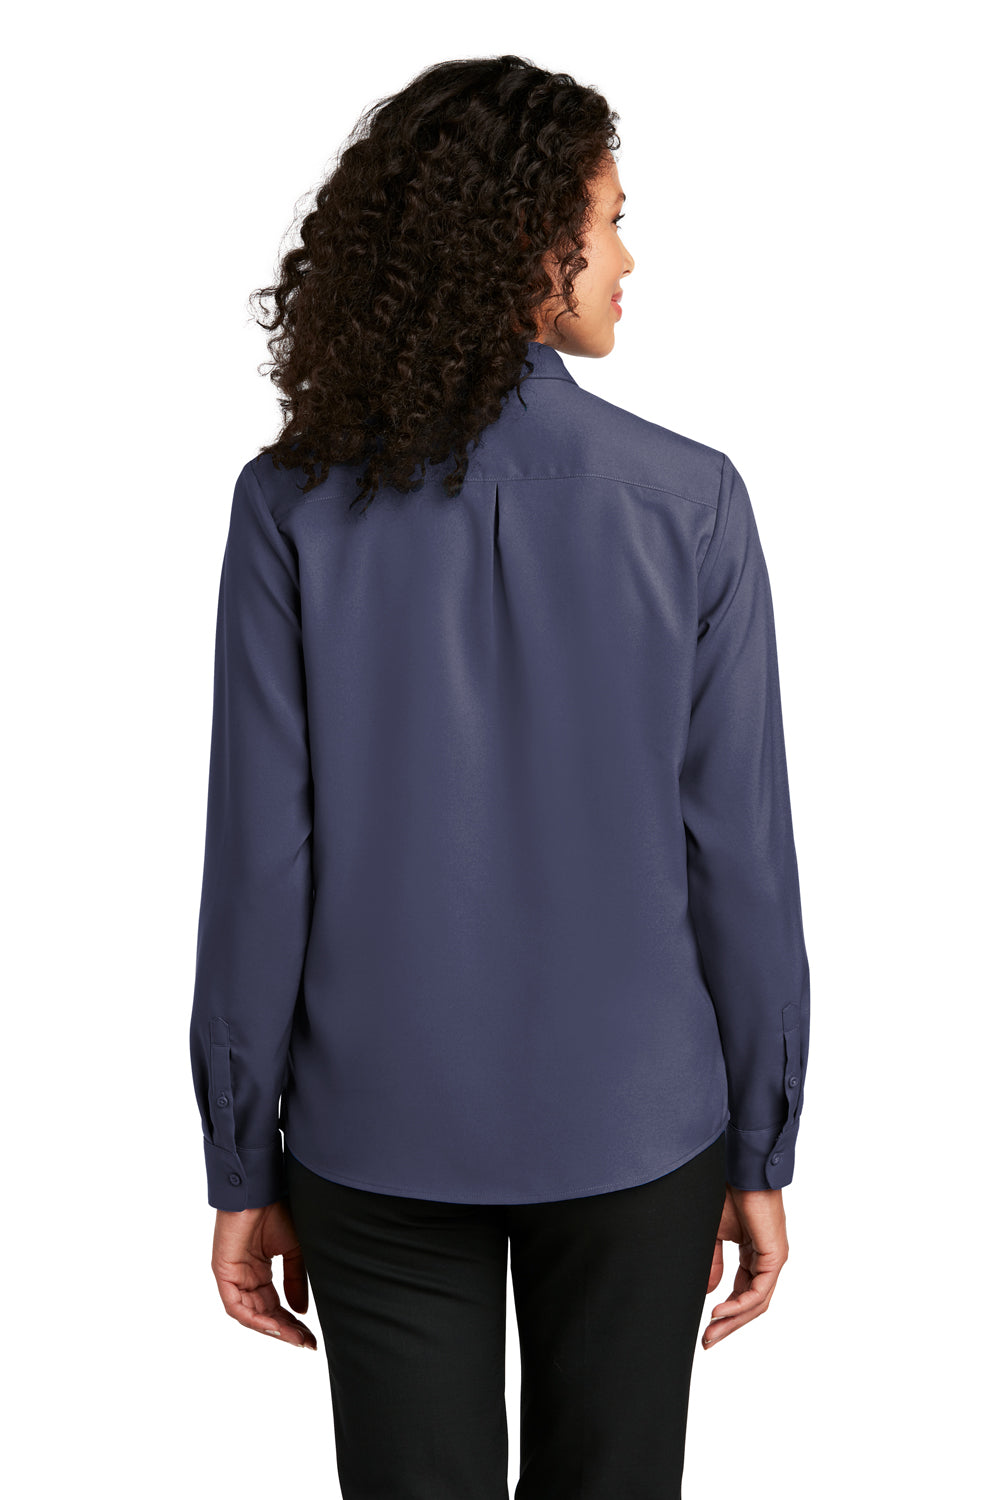 Port Authority Womens Performance Long Sleeve Button Down Shirt True Navy Blue Side